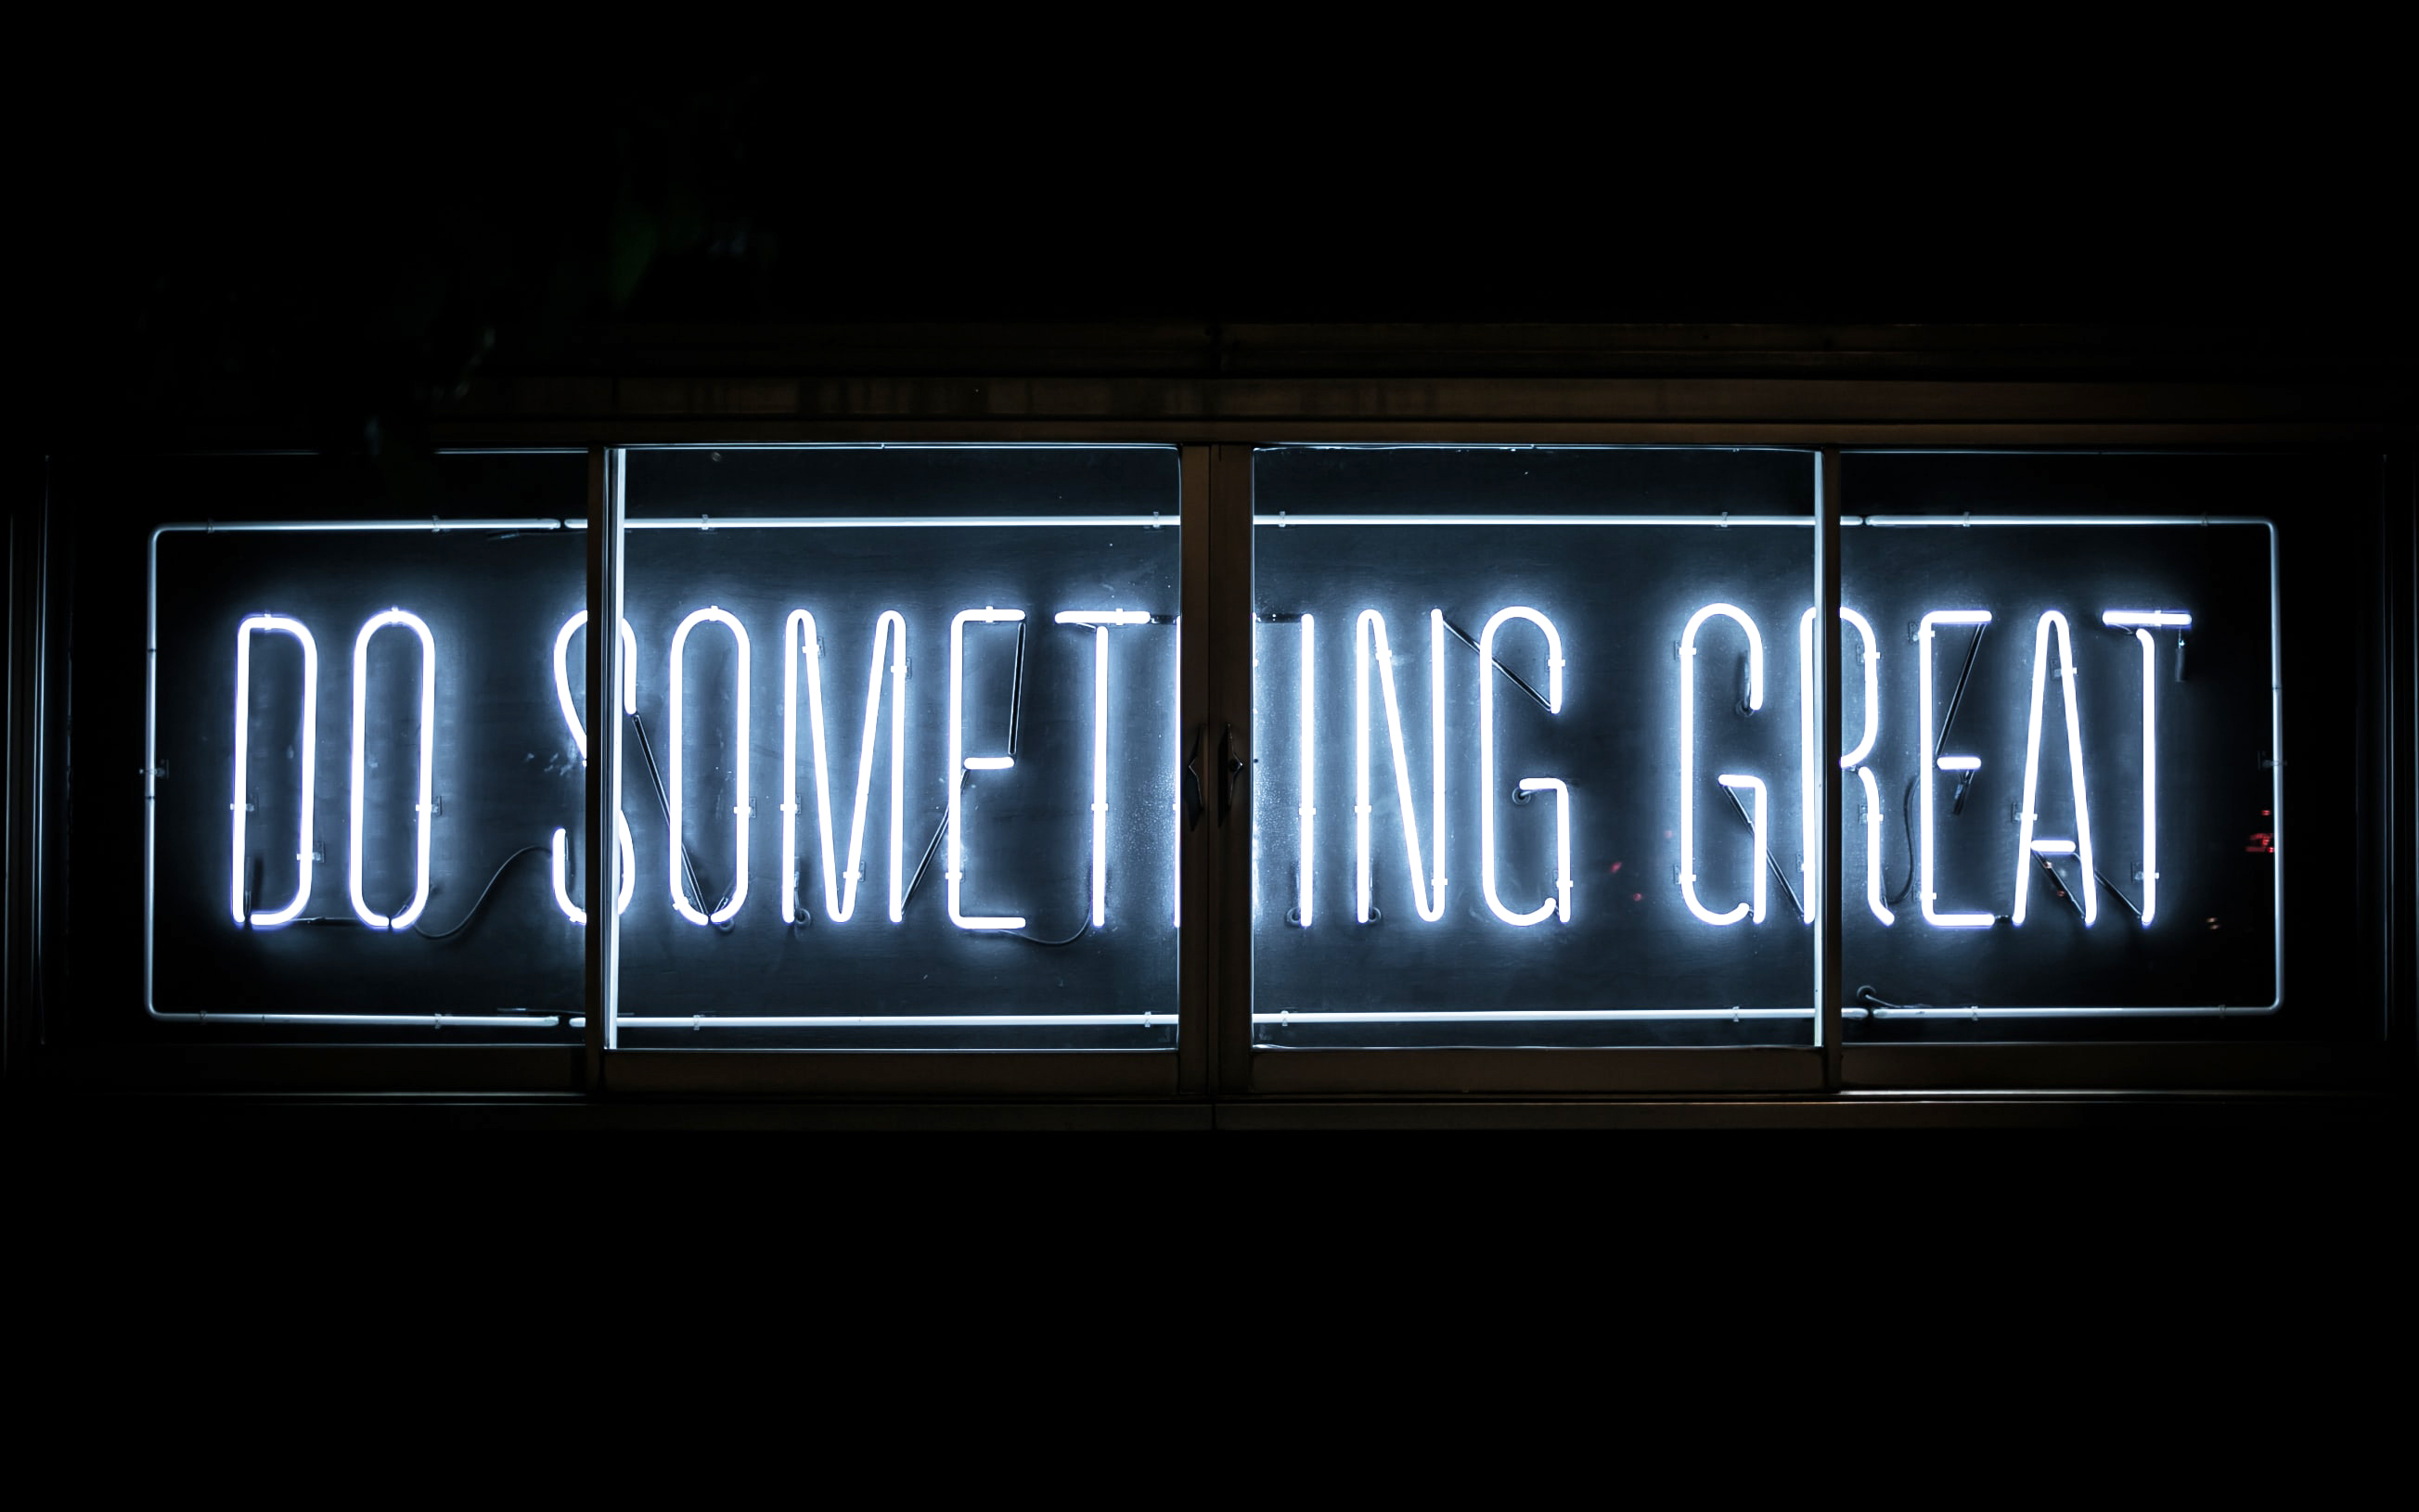 Do Something Great in neon lights